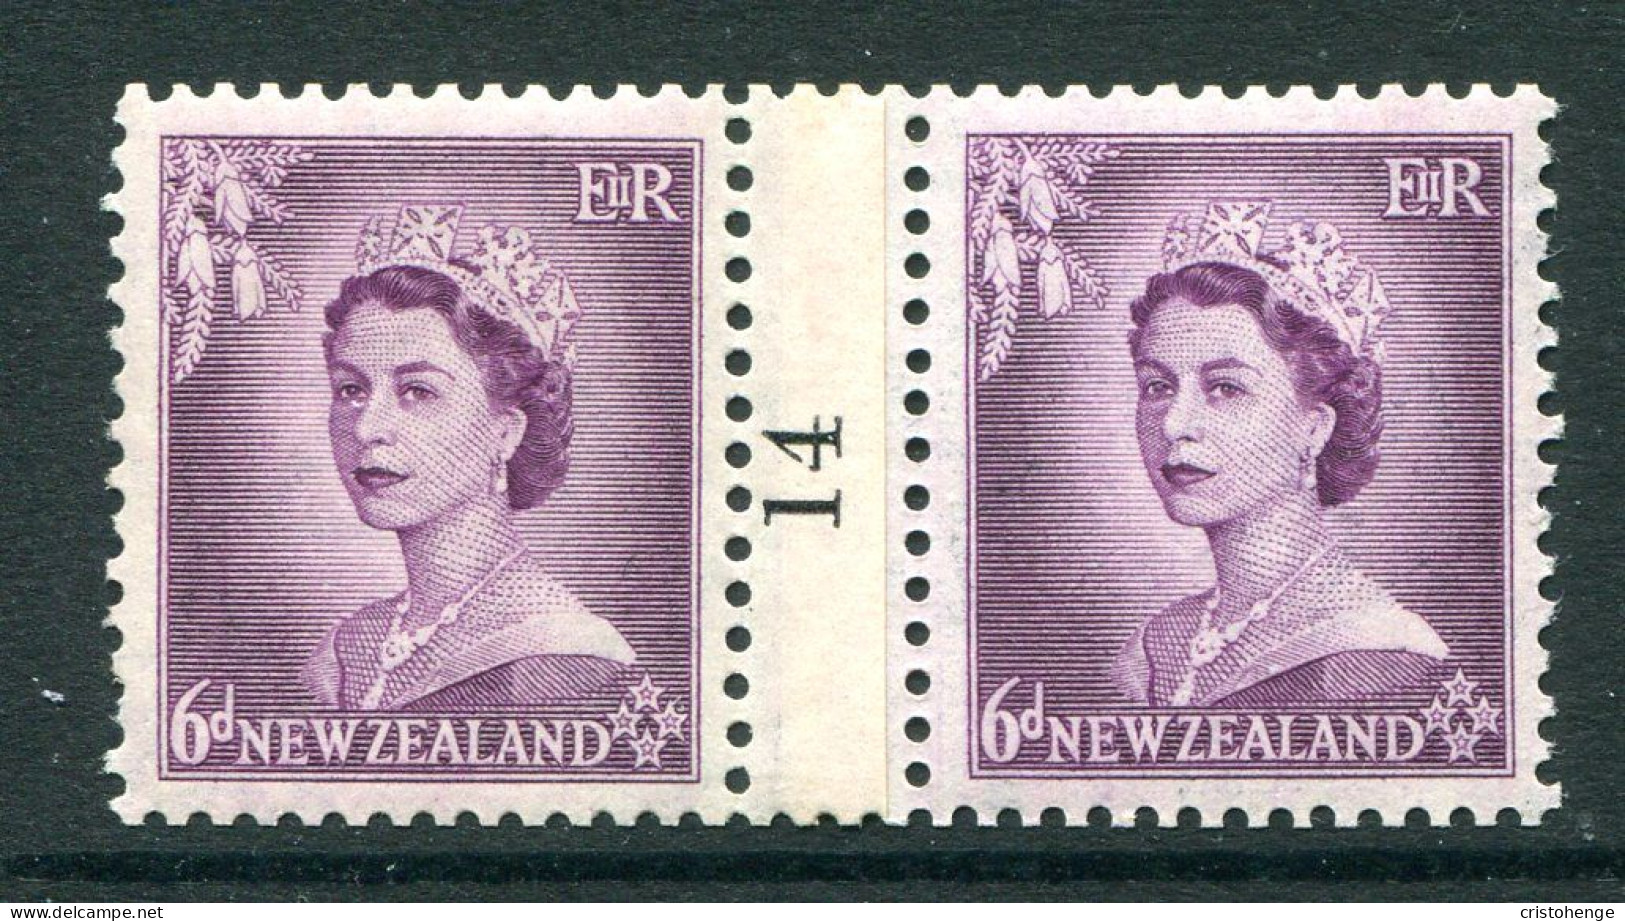 New Zealand 1953-59 QEII Definitives - Coil Pairs - 6d Purple - No. 14 - LHM (SG Unlisted) - Unused Stamps